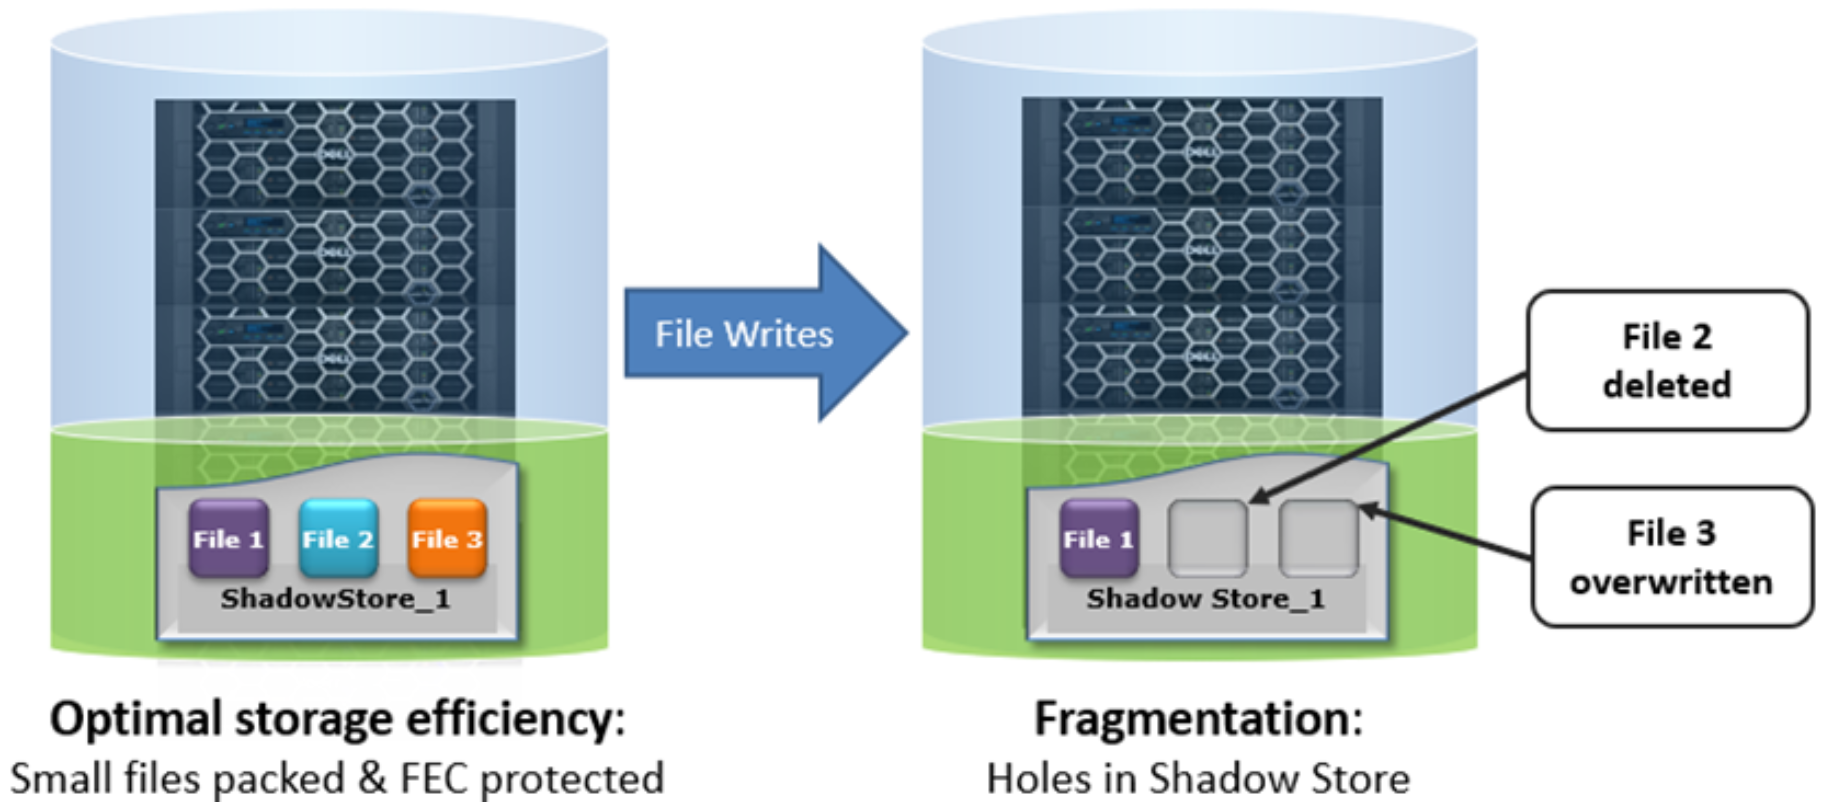 Graphic showing fragmentation resulting from containerized files with shadow references being deleted, truncated, or overwritten, resulting in reduced storage efficiency.  